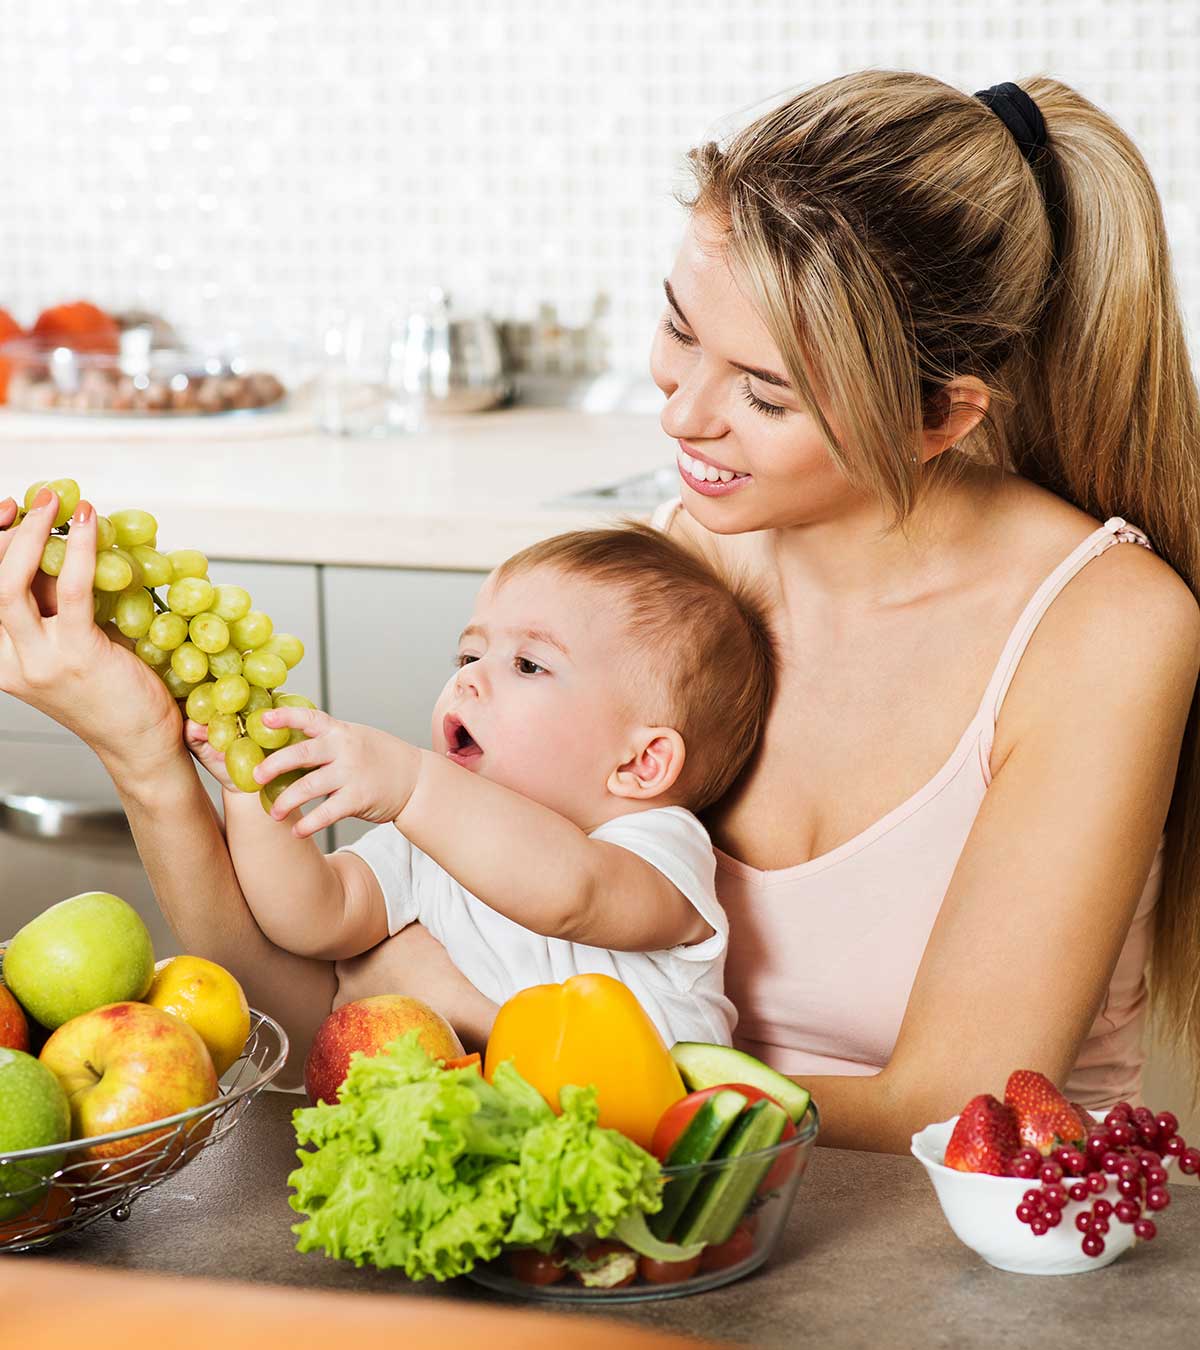 Can You Eat Grapes While Breastfeeding?